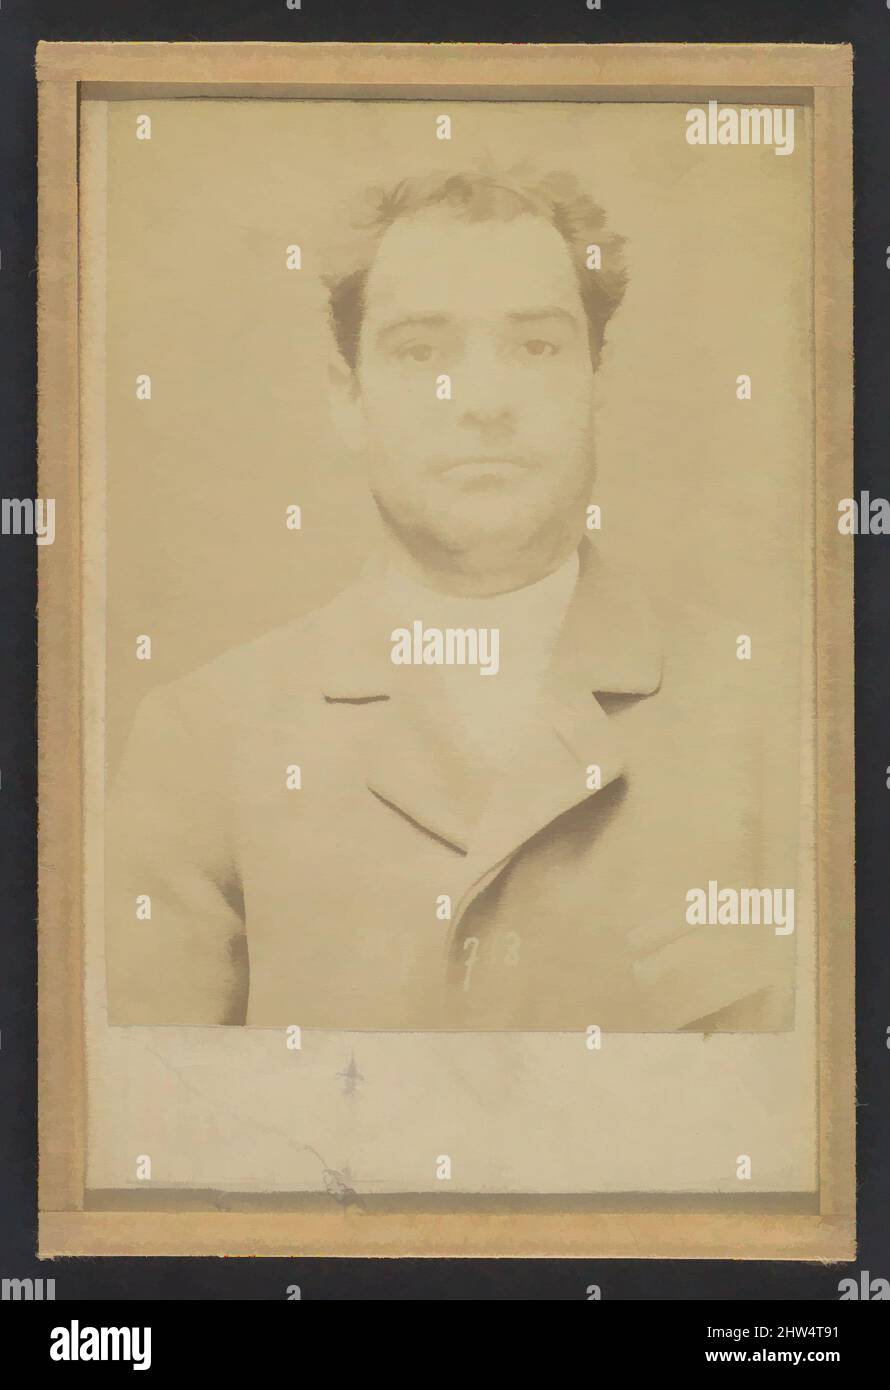 Art inspired by Dauriac. Henri, Georges. 36 ans, né à Memphis (USA). Agent d'affaires. Extortion de fonds. 22/12/94., 1894, Albumen silver print from glass negative, 10.5 x 7 x 0.5 cm (4 1/8 x 2 3/4 x 3/16 in.) each, Photographs, Alphonse Bertillon (French, 1853–1914), Born into a, Classic works modernized by Artotop with a splash of modernity. Shapes, color and value, eye-catching visual impact on art. Emotions through freedom of artworks in a contemporary way. A timeless message pursuing a wildly creative new direction. Artists turning to the digital medium and creating the Artotop NFT Stock Photo